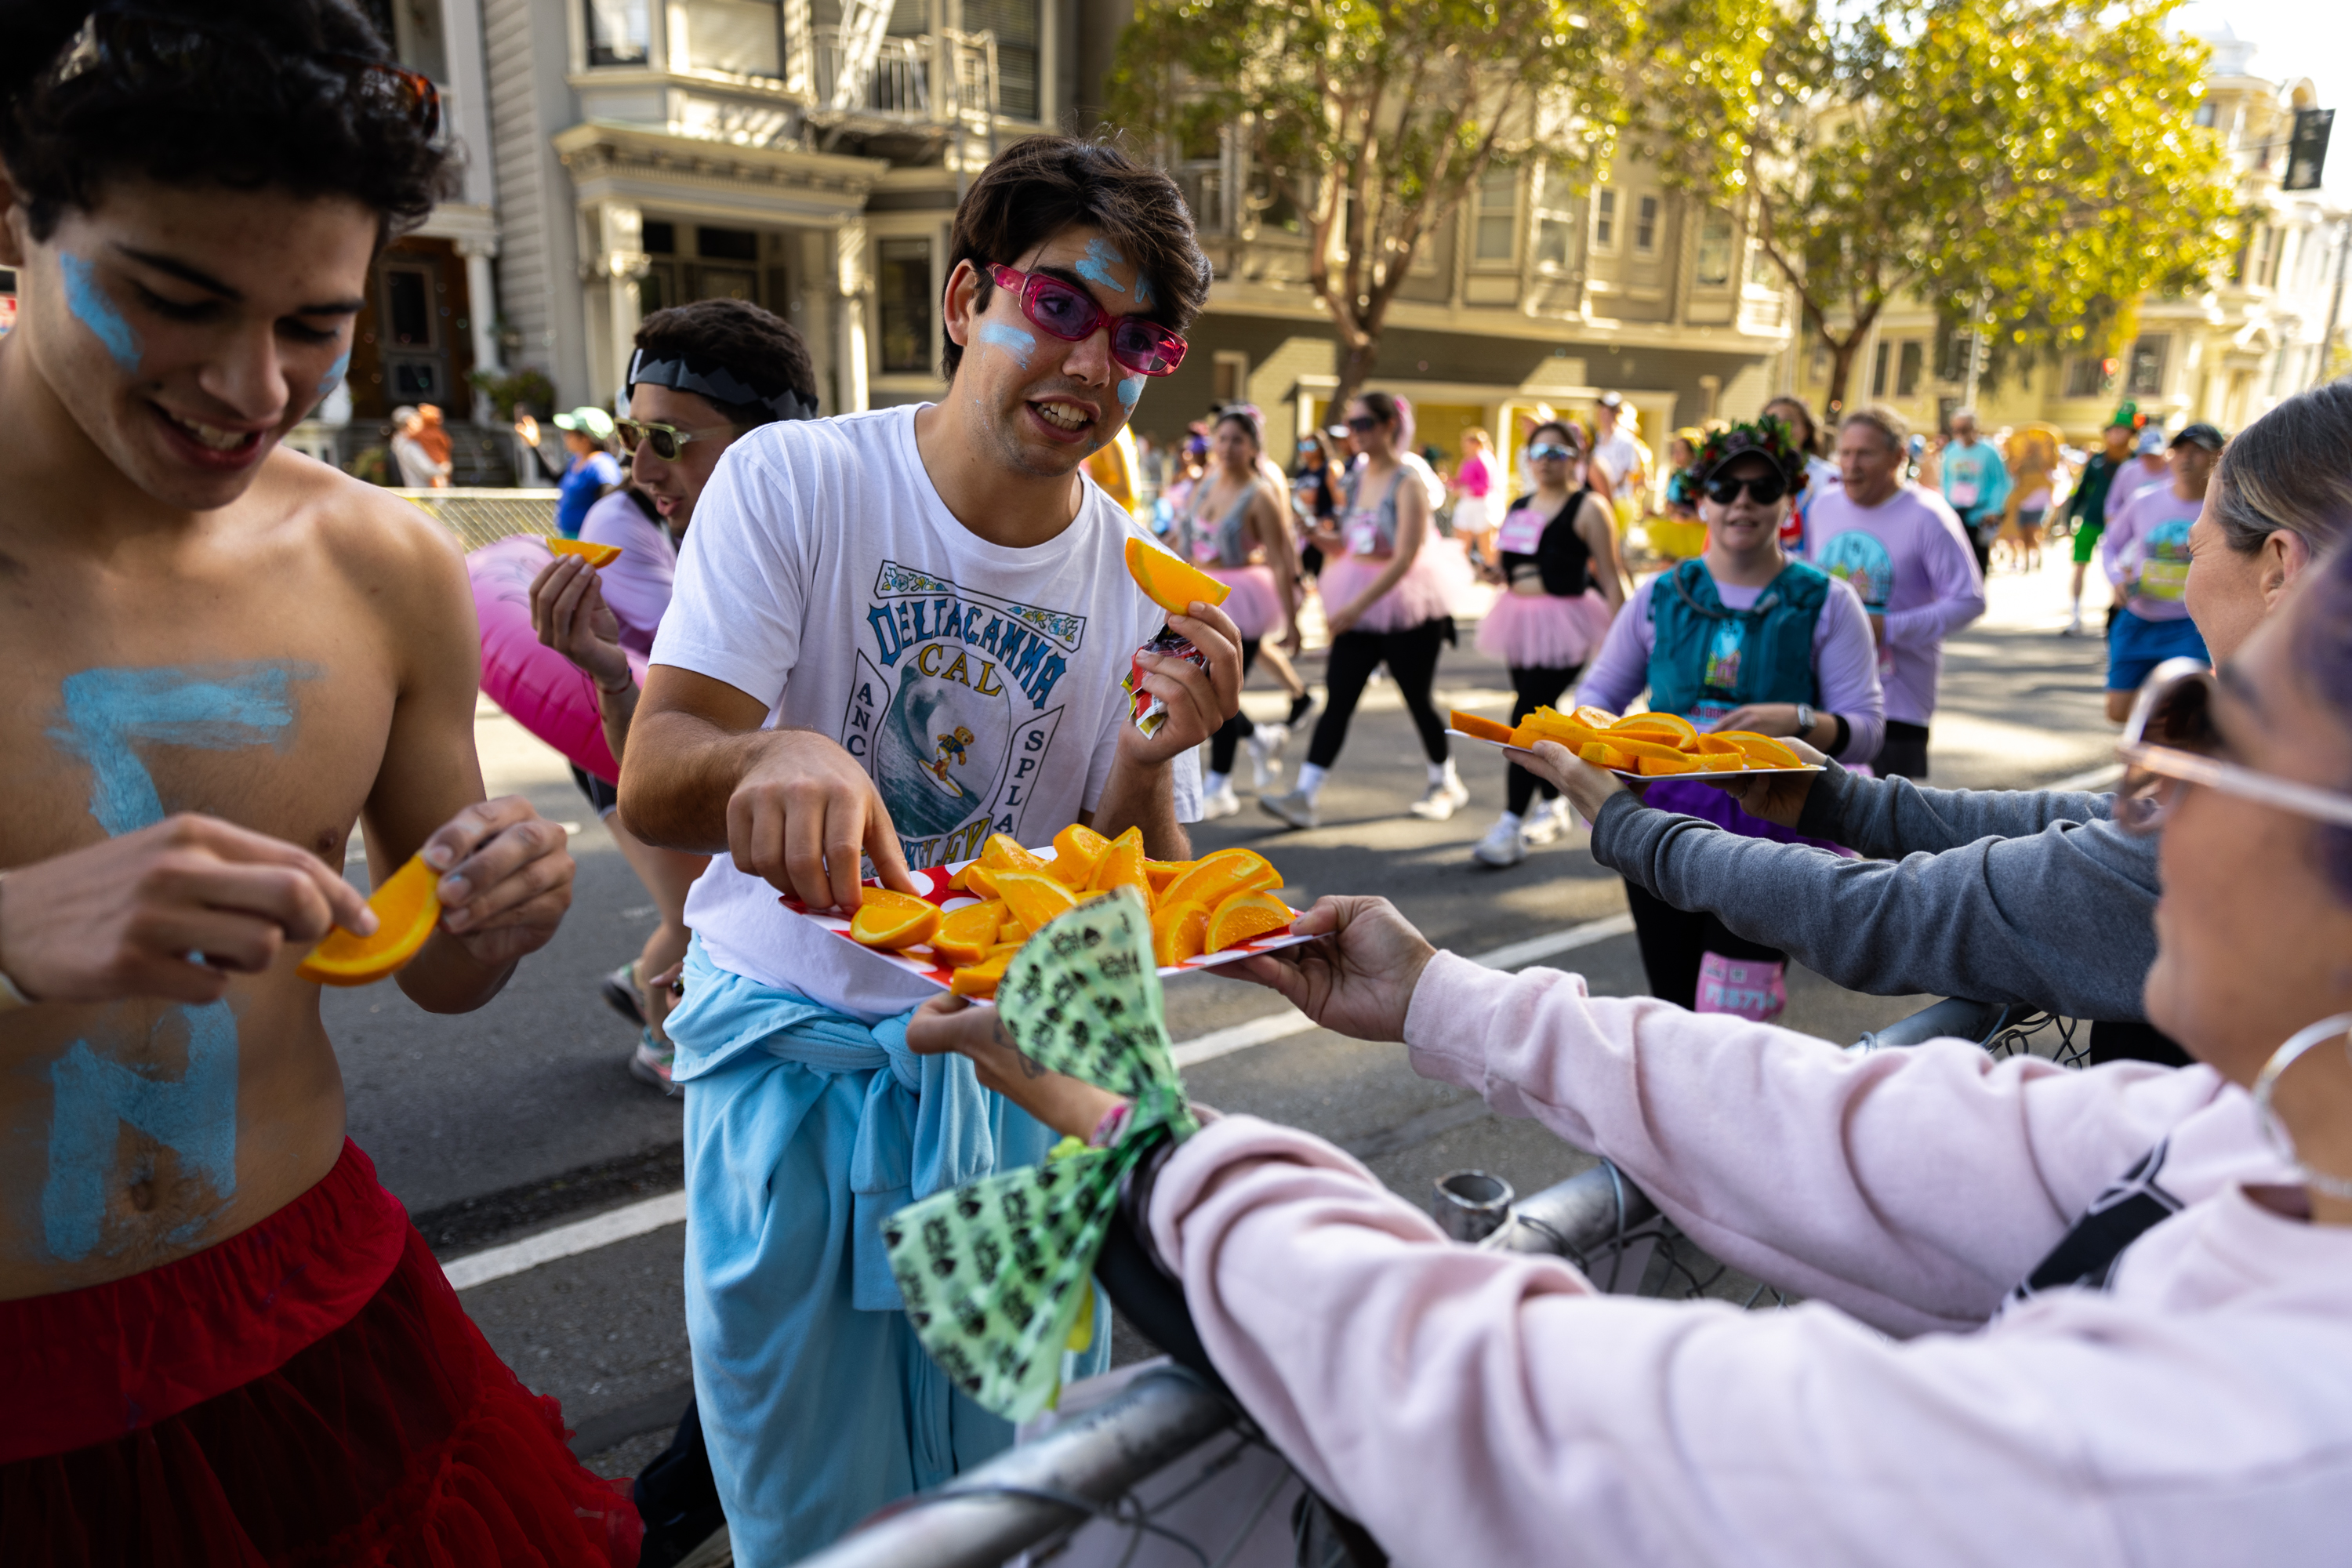 Participants grab orange slices from volunteers during a lively street event, sporting colorful attire and fun makeup.